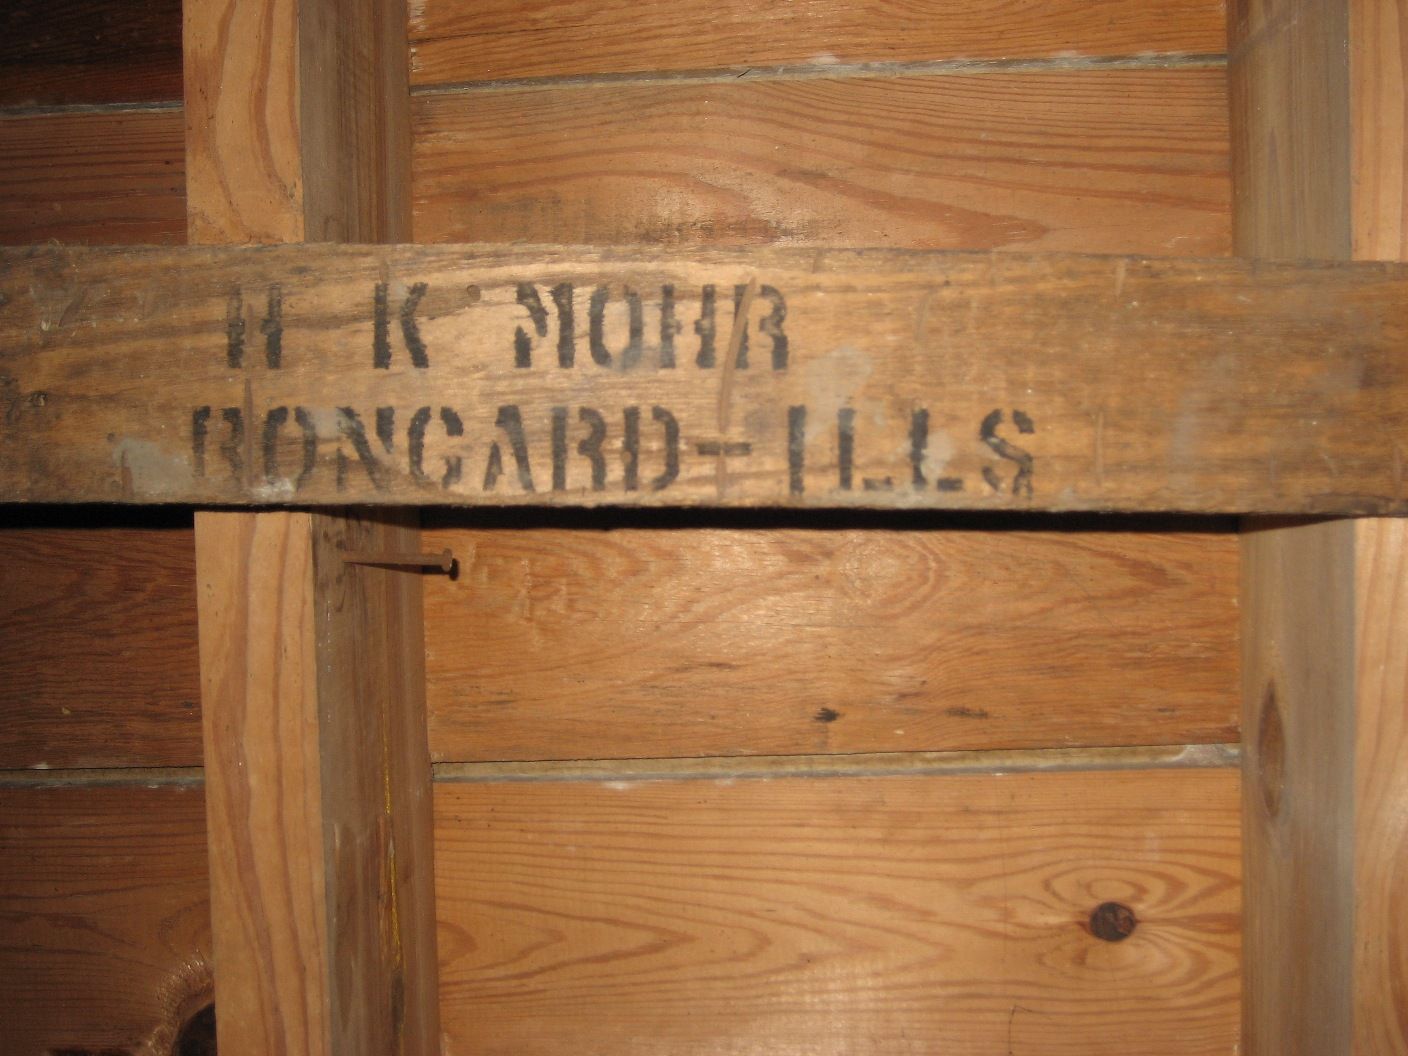 Sometimes, the markings found on lumber arent what you might expect!